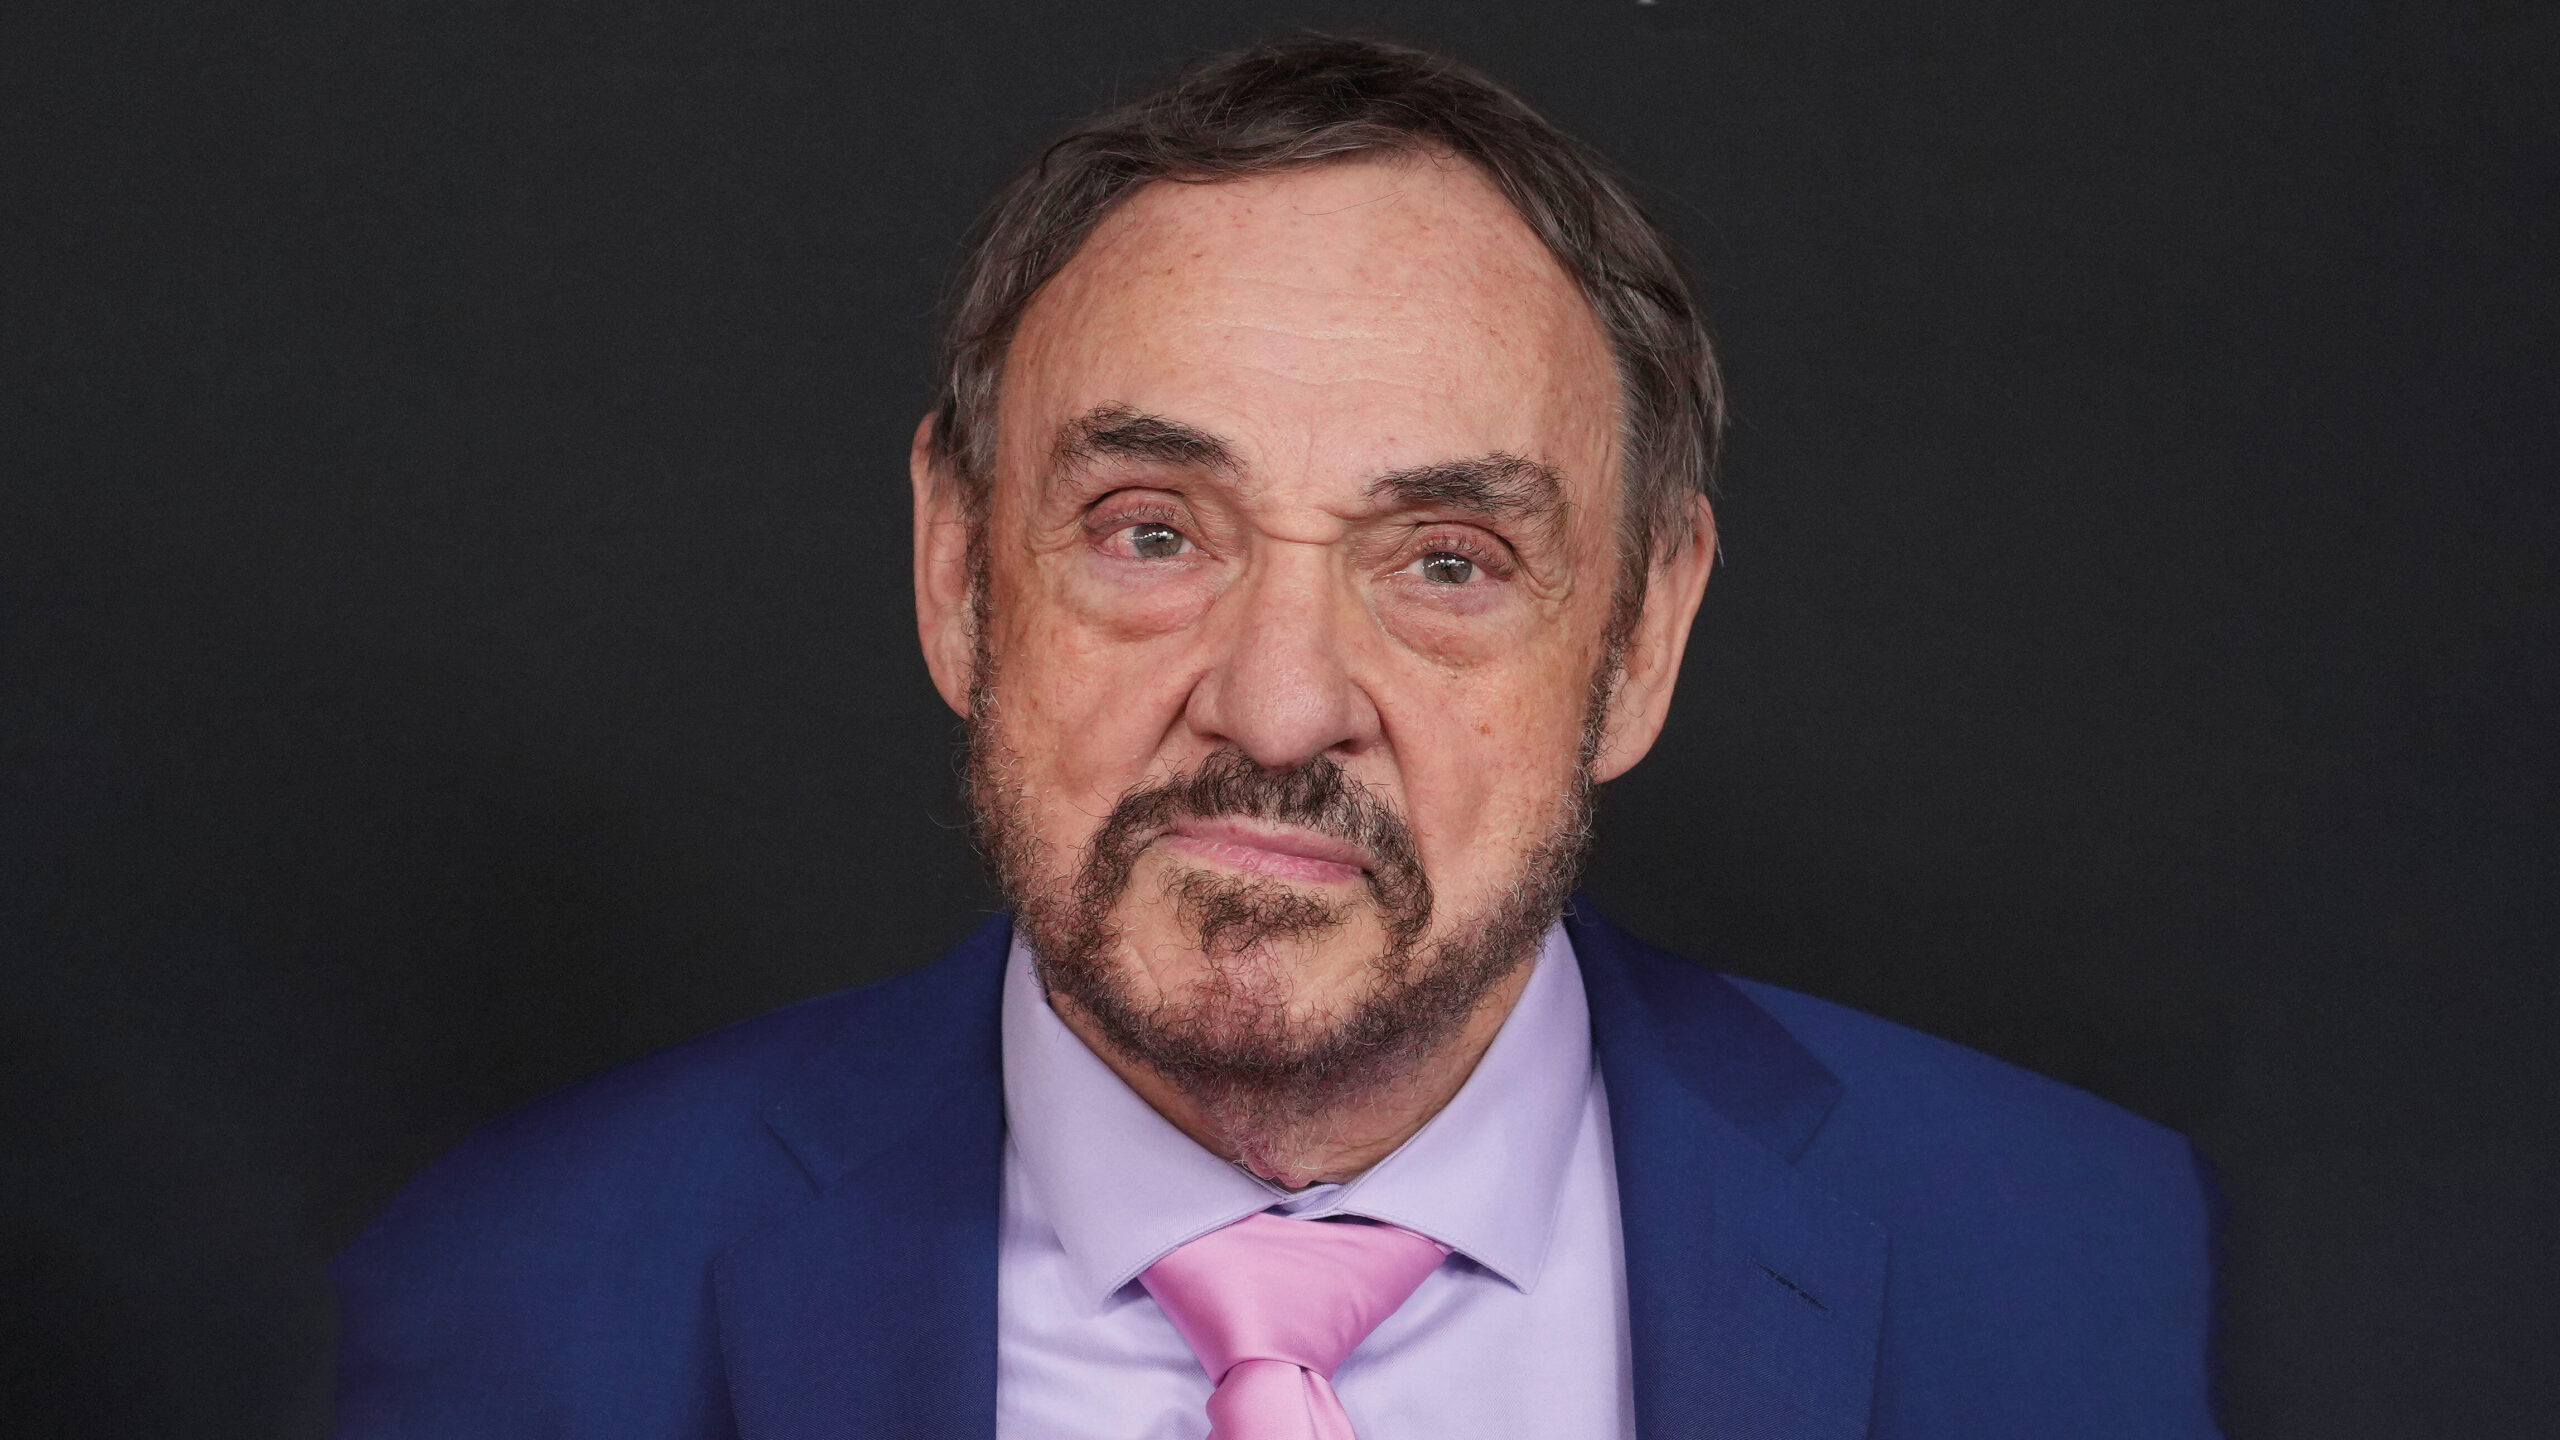 John Rhys-Davies in a blue jacket and pink tie